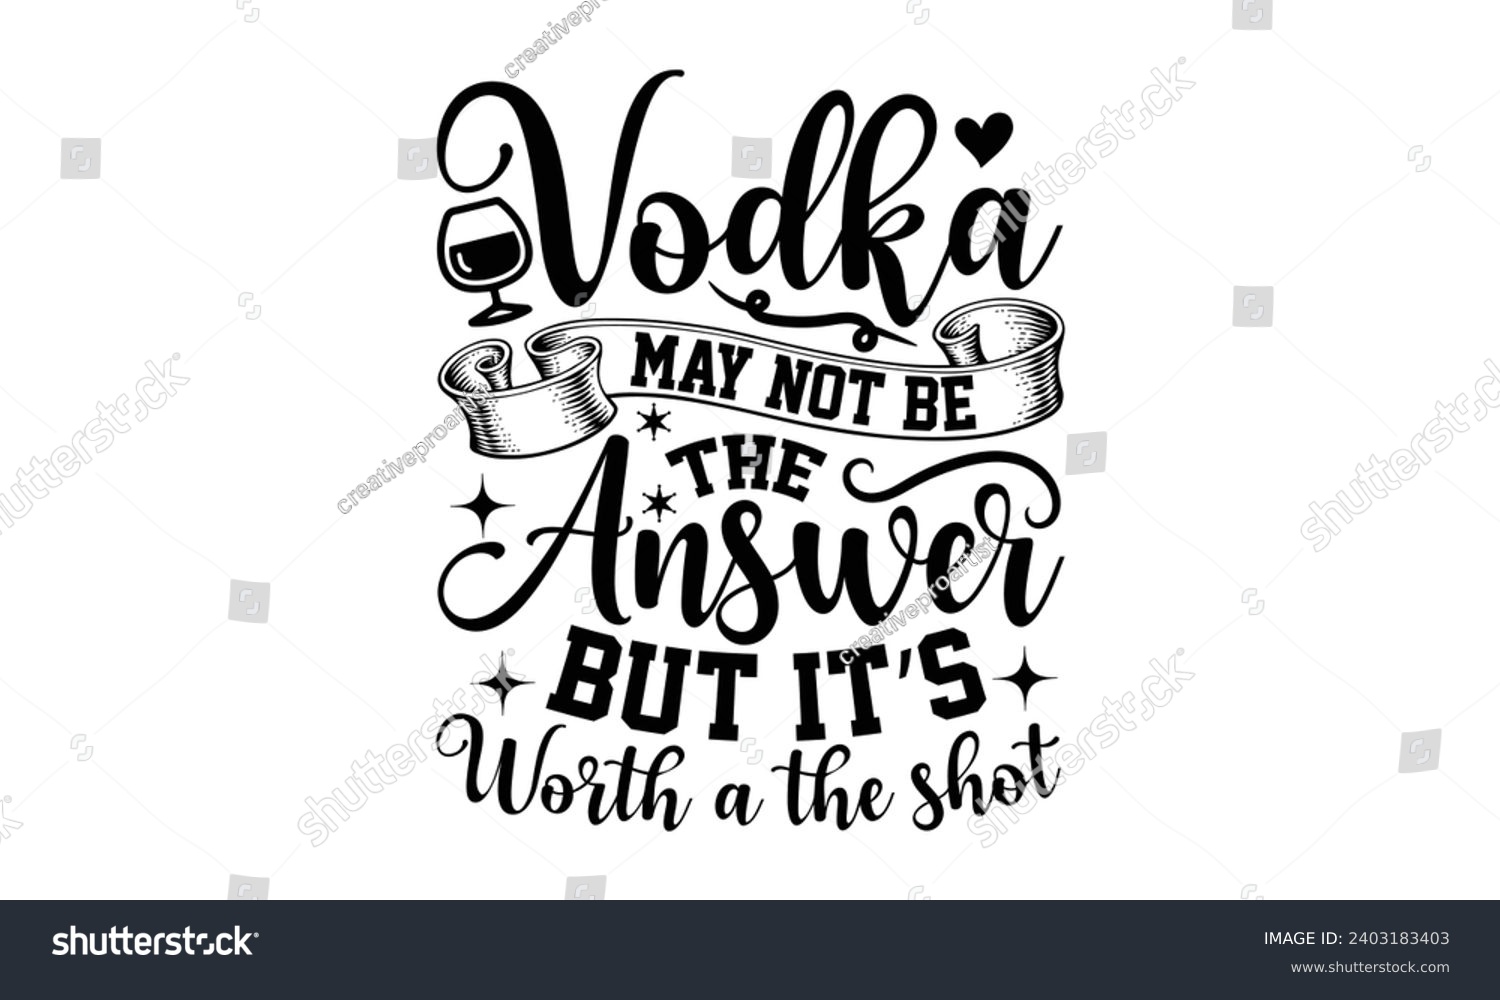 SVG of Vodka May Not Be The Answer But It’s Worth A The Shot- Alcohol t- shirt design, Hand drawn vintage illustration with hand-lettering and decoration elements, greeting card template with typography text svg